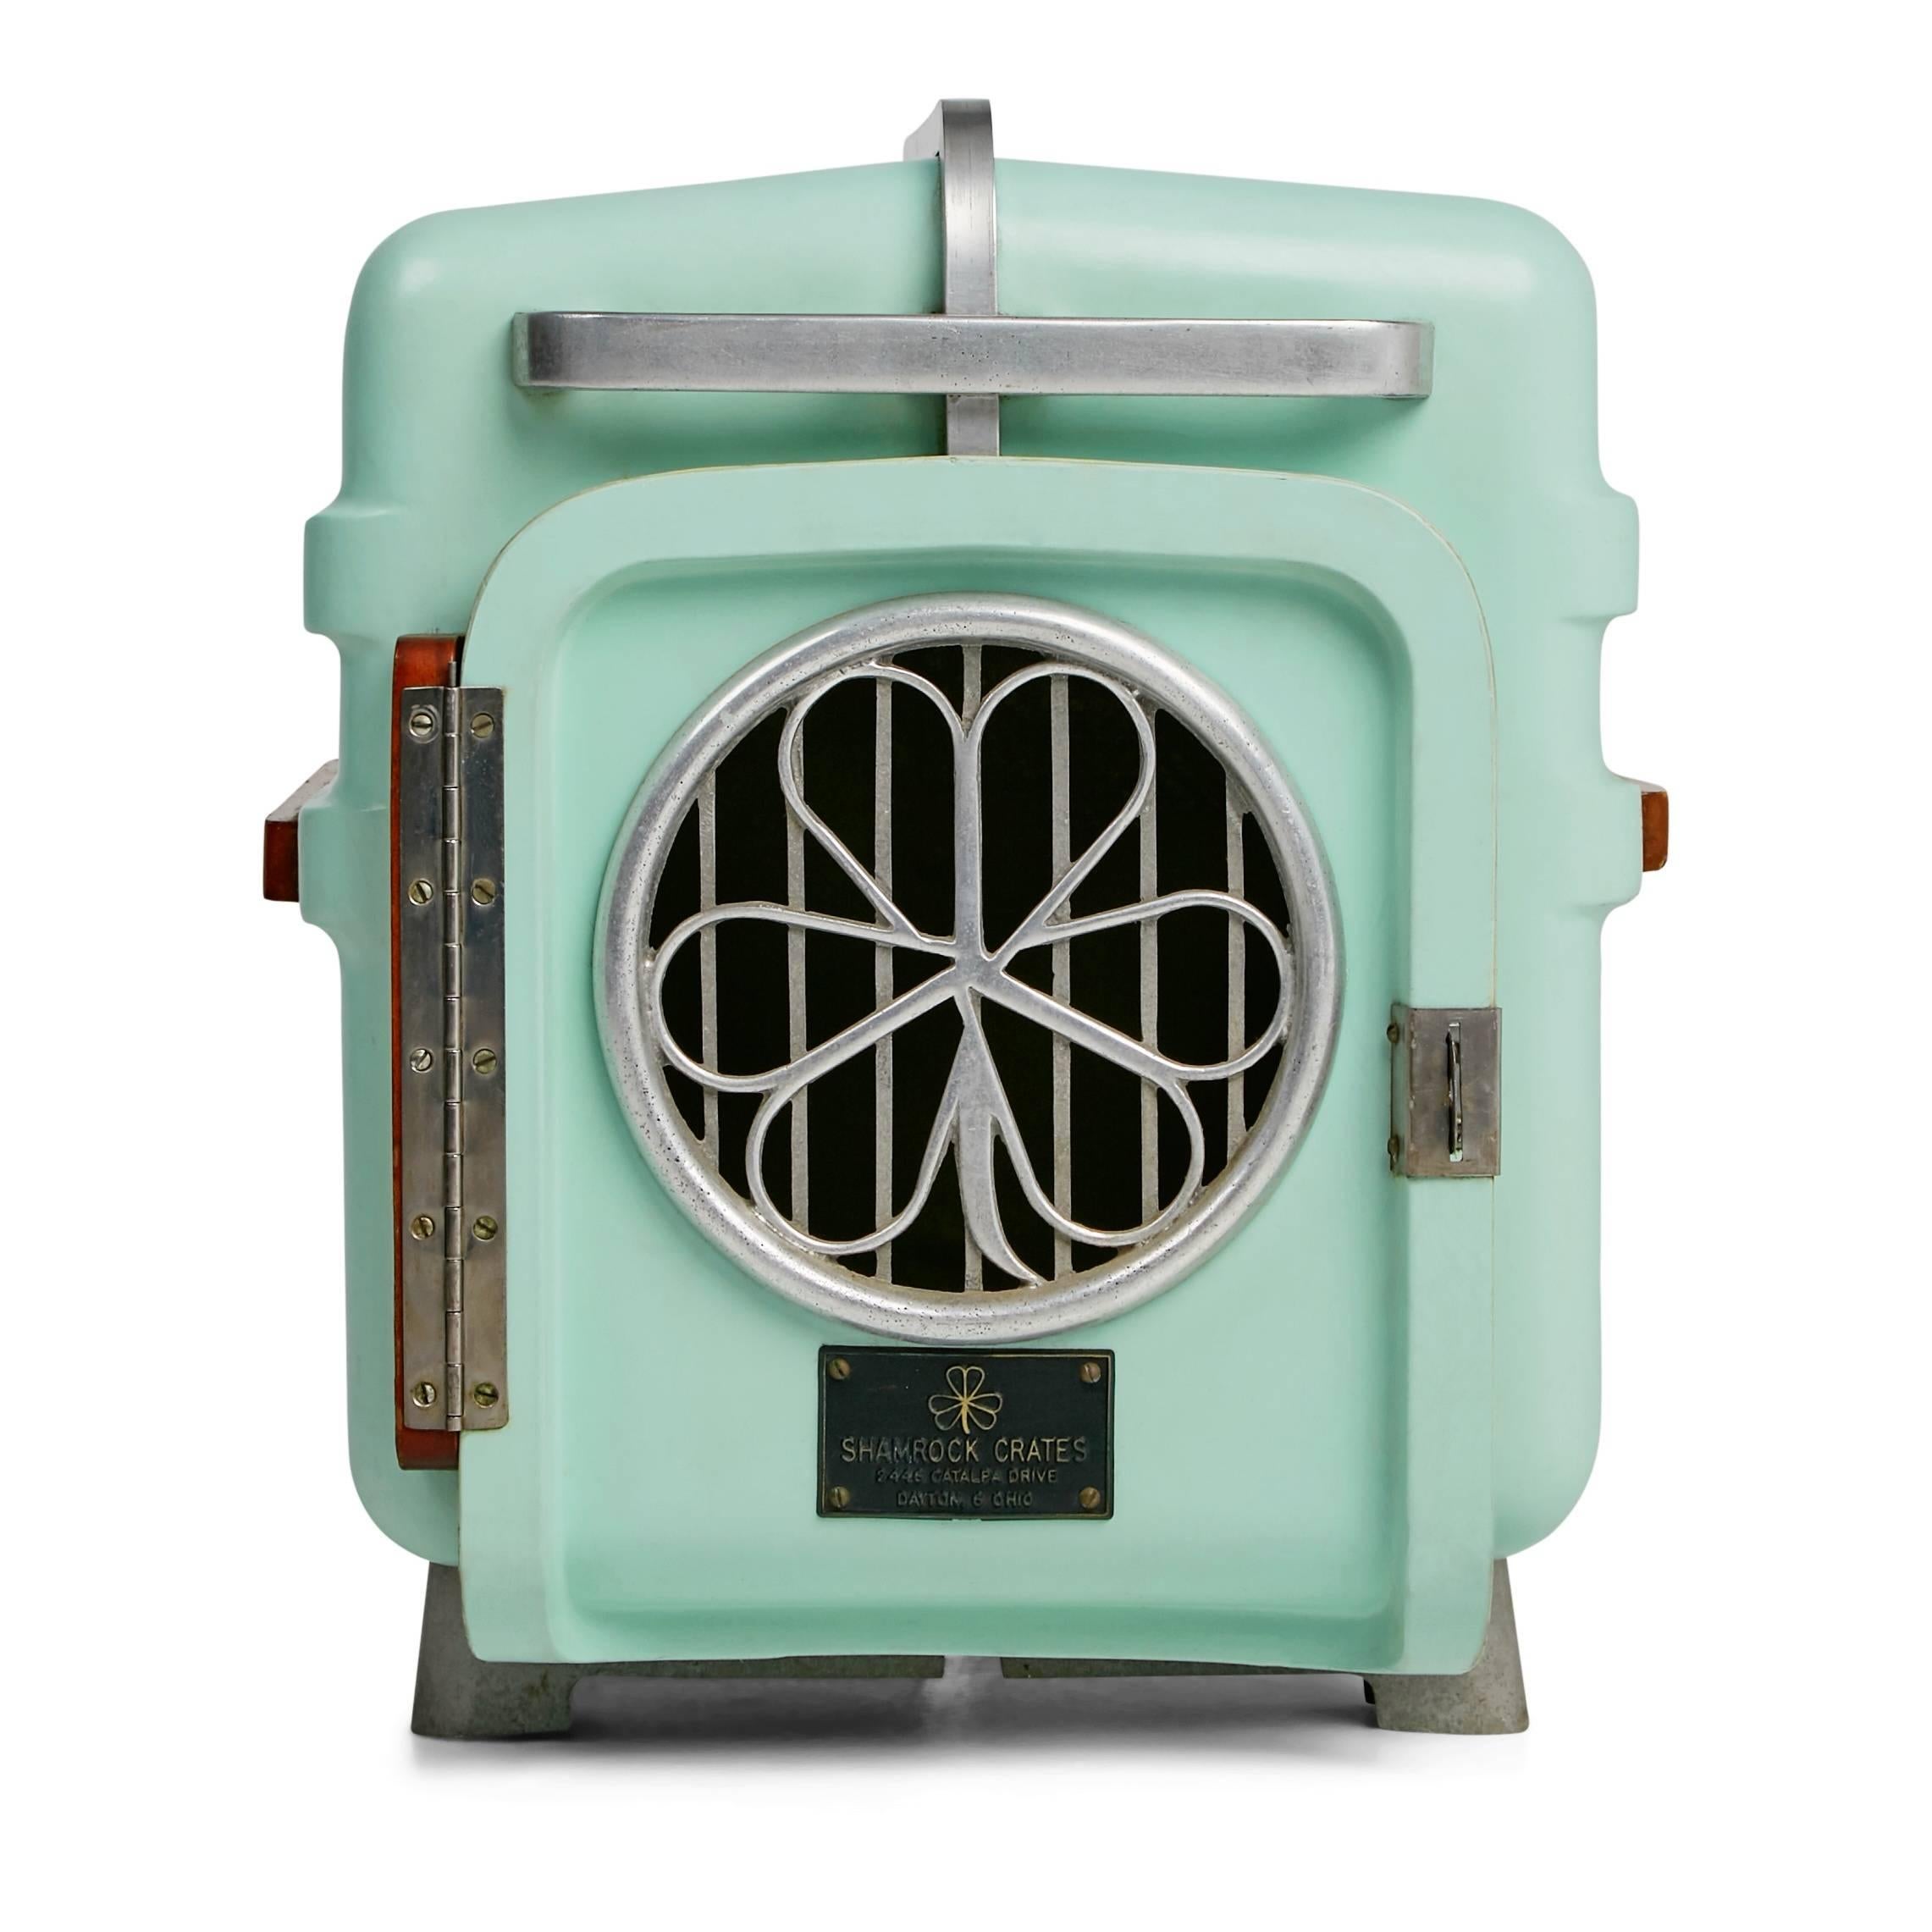 A darling vintage piece that is both practical and decorative. This fantastic mid-century modern pet carrier by Shamrock Crates features a mint pastel lacquered fiberglass shell with an aluminum base, protective band and handles both front and back